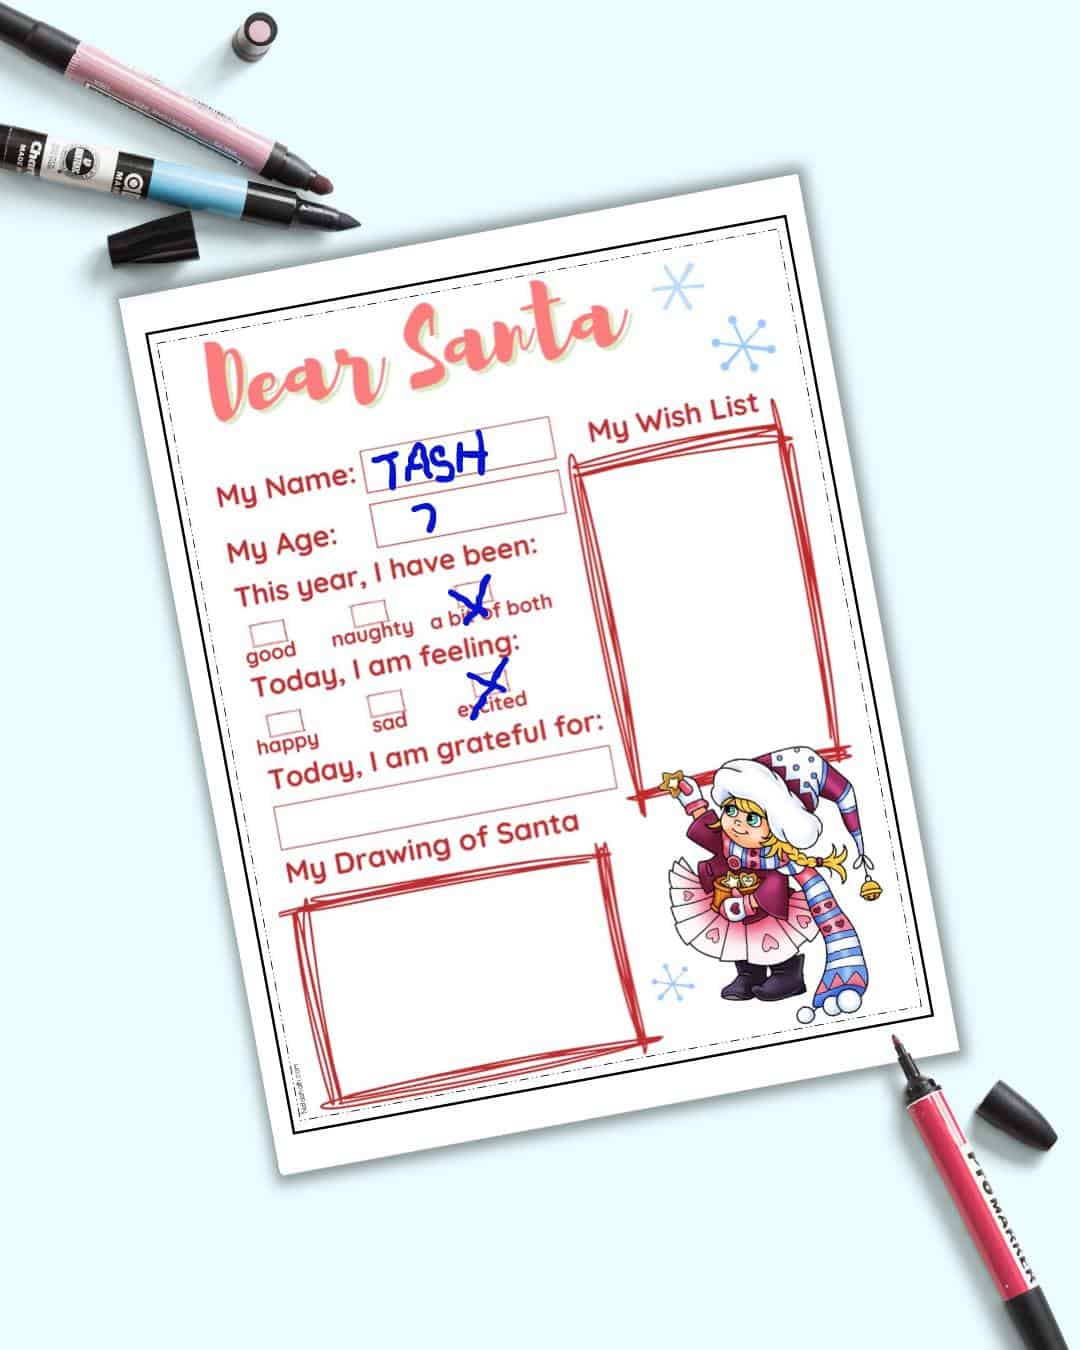 A top down mockup of a Santa letter printable filled in with "My name is Tash, My age: 7. "